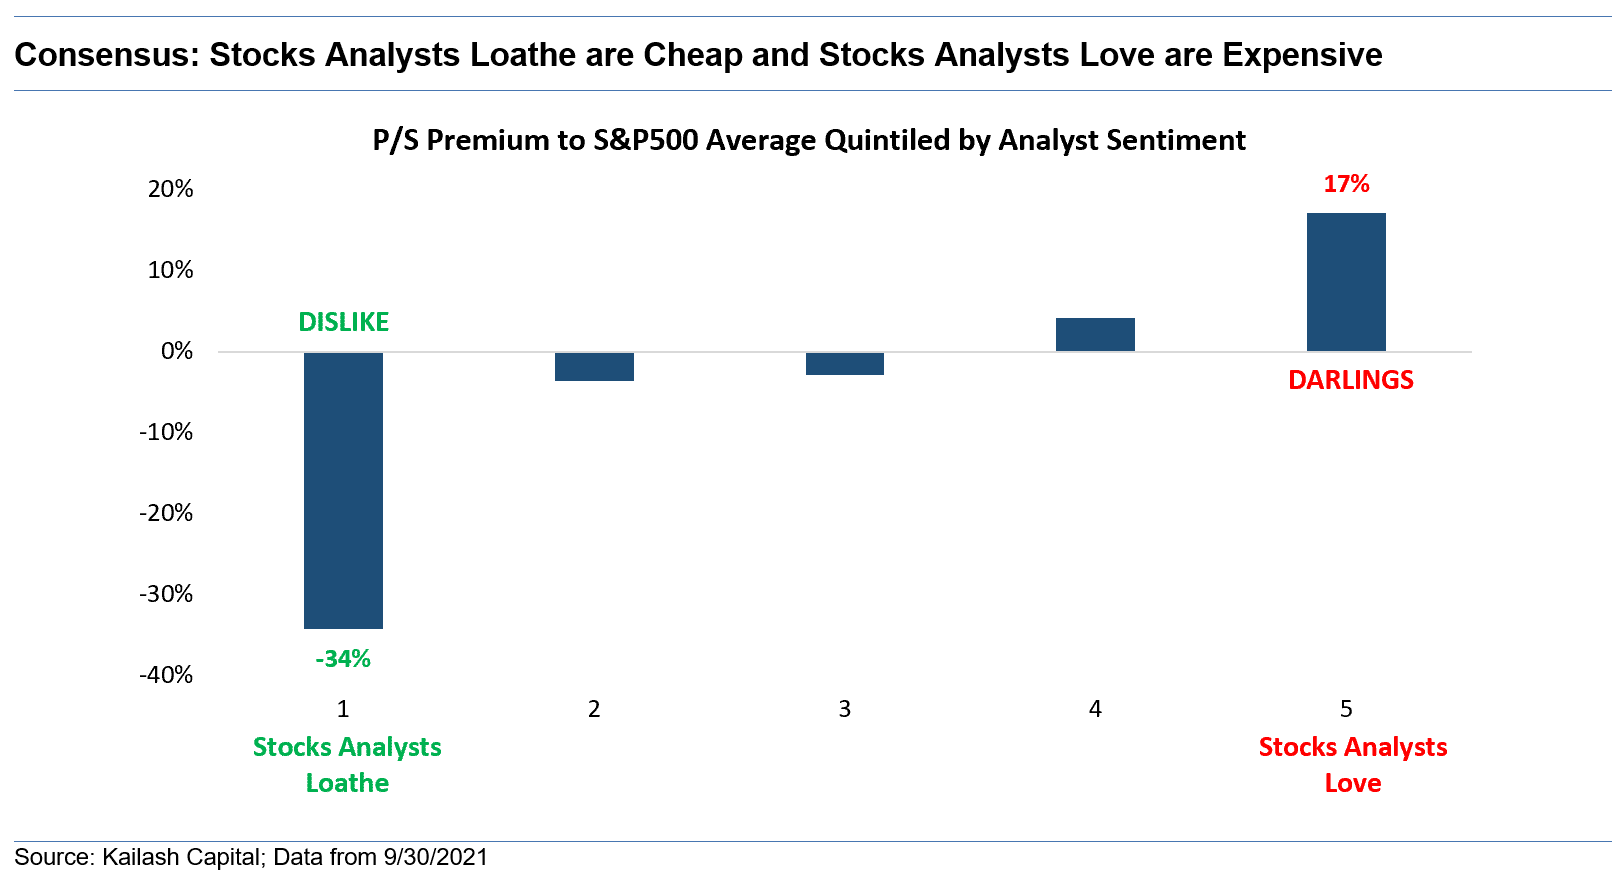 Consensus Stocks Analysts Loathe are Cheap and Stocks Analysts Love are Expensive